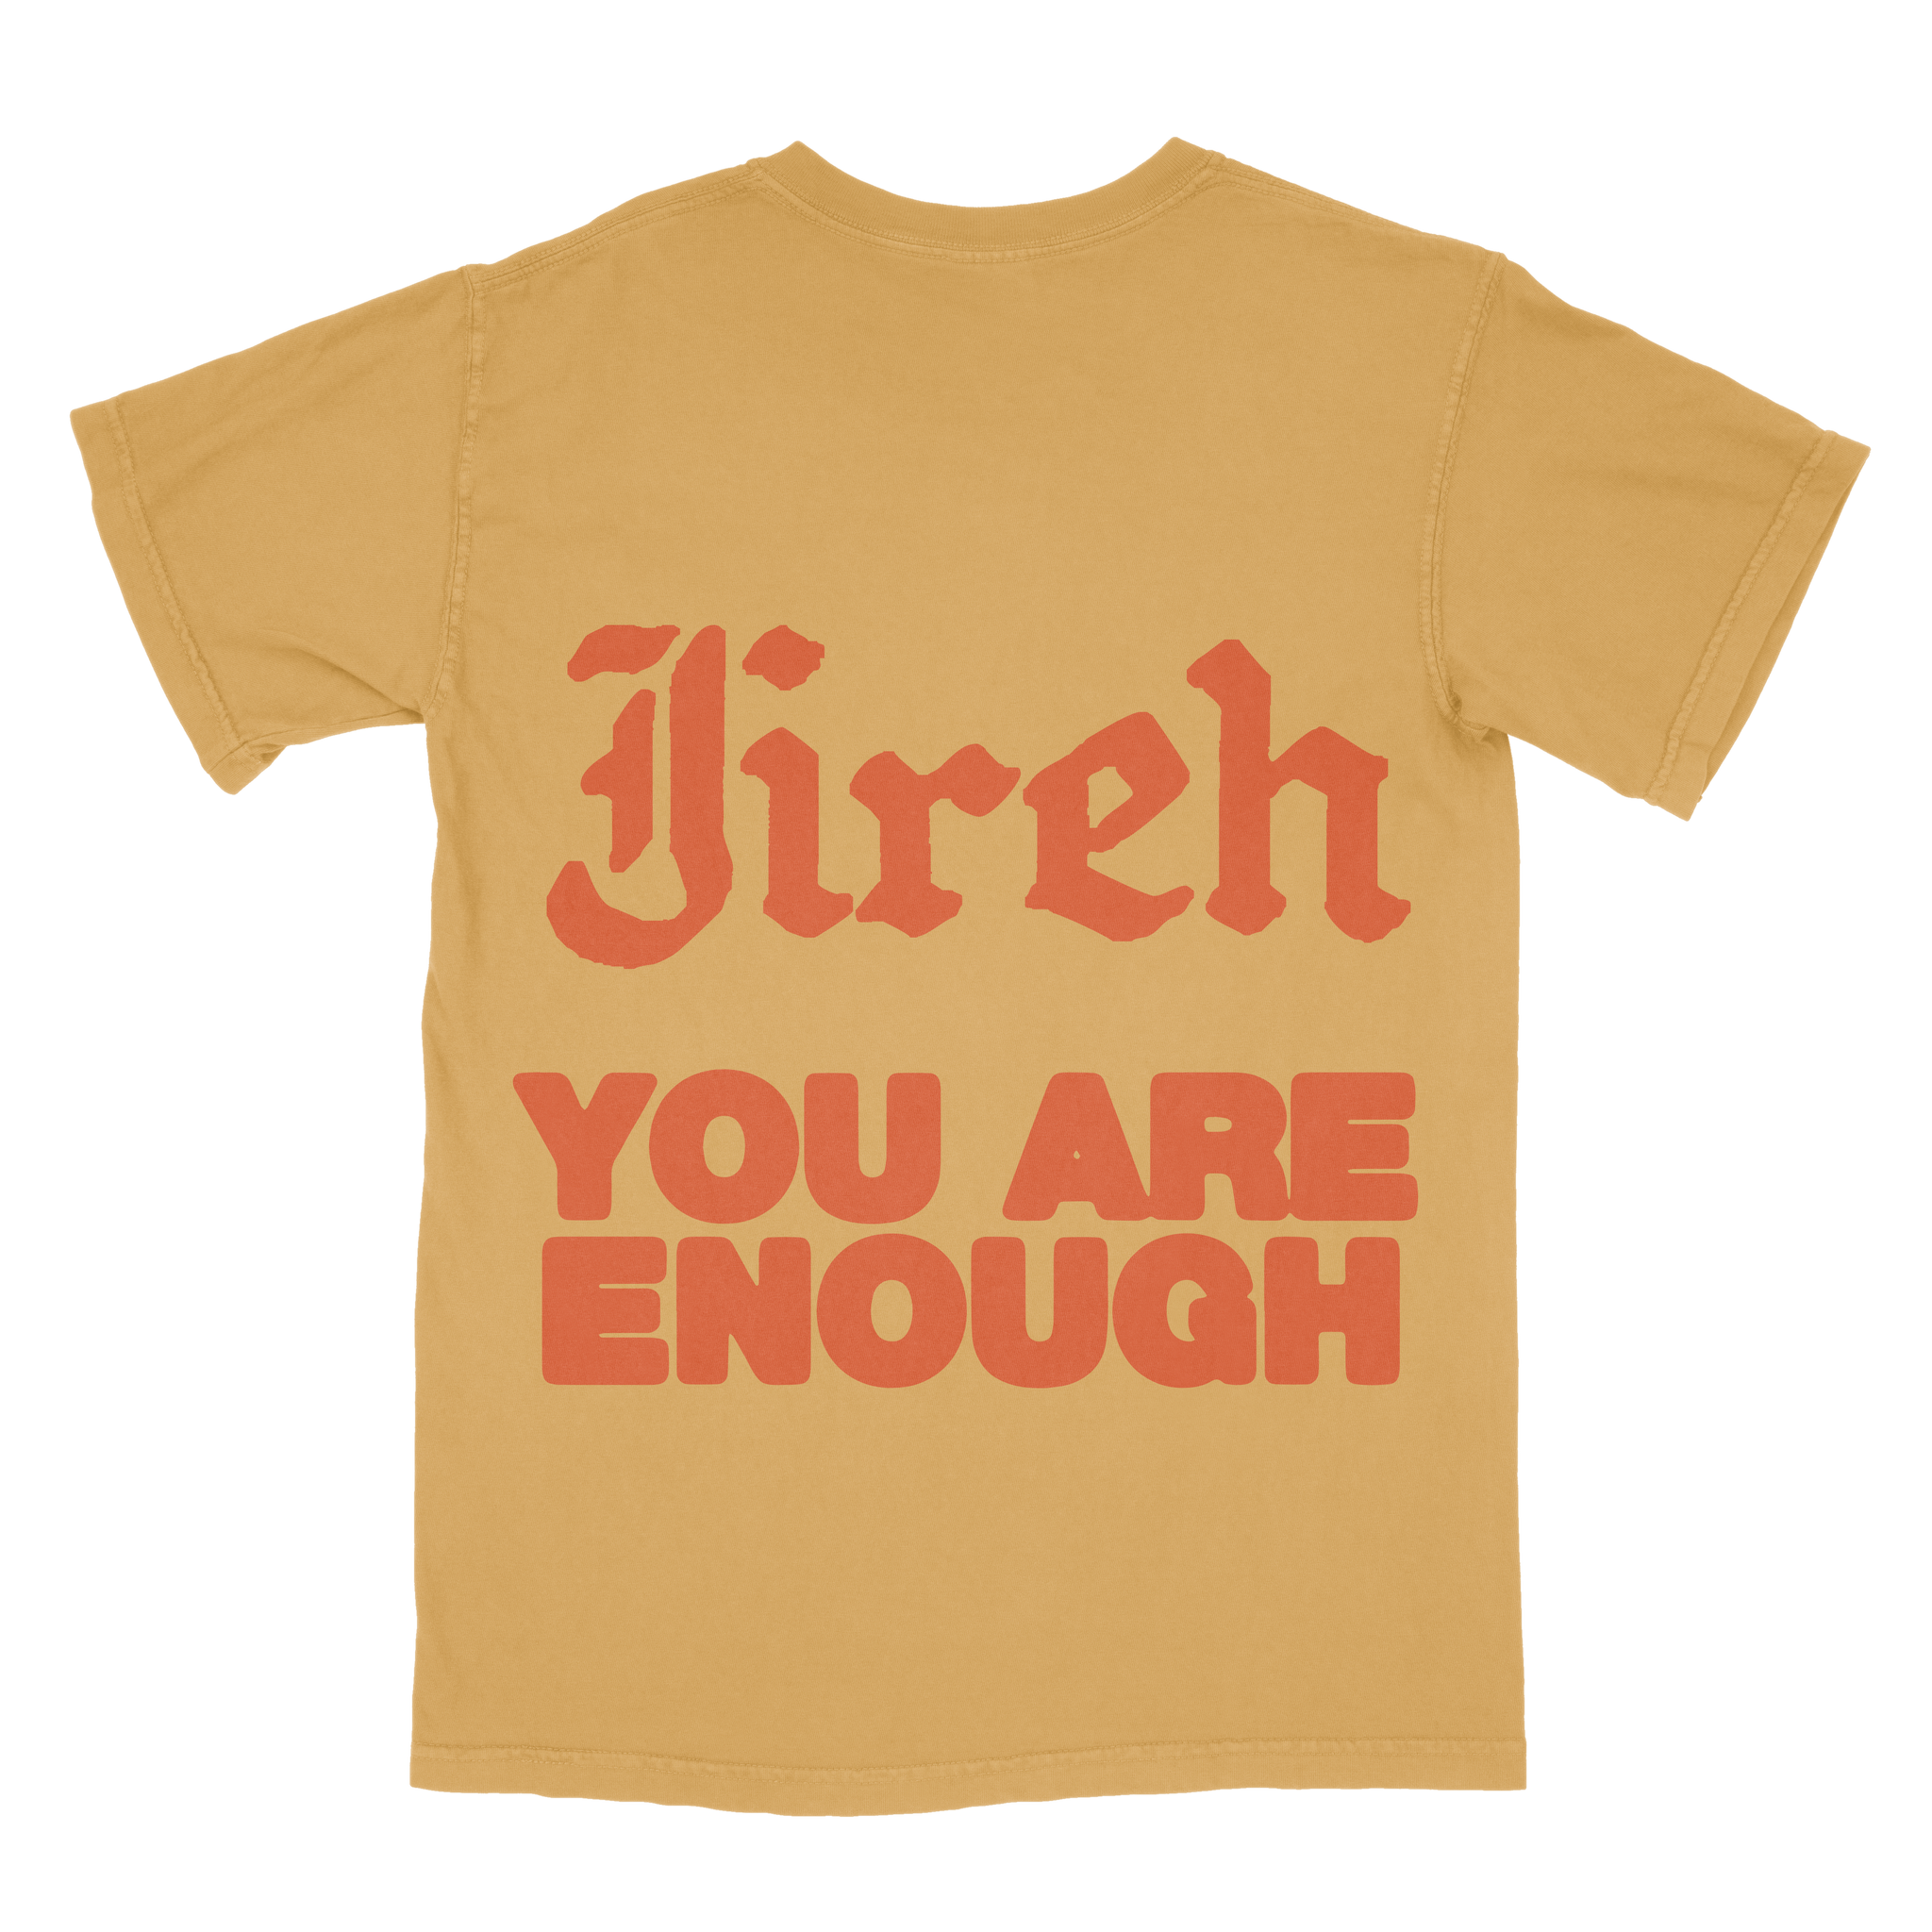 Flatlay - Mustard shirt Jireh You Are Enough on the back in orange text.